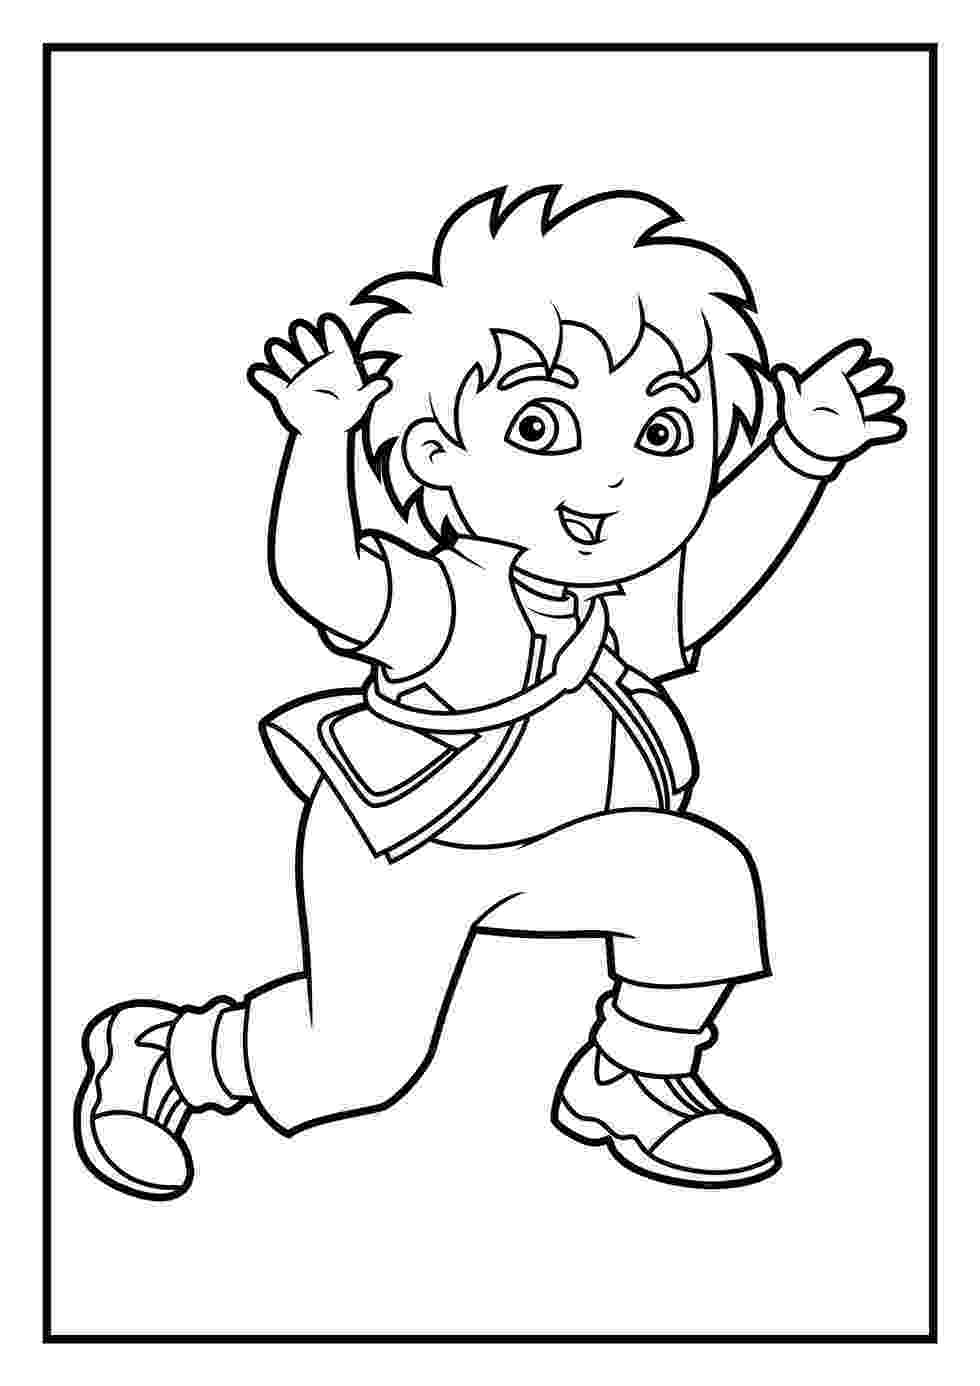 dora colouring dora coloring pages diego coloring pages dora colouring 1 2